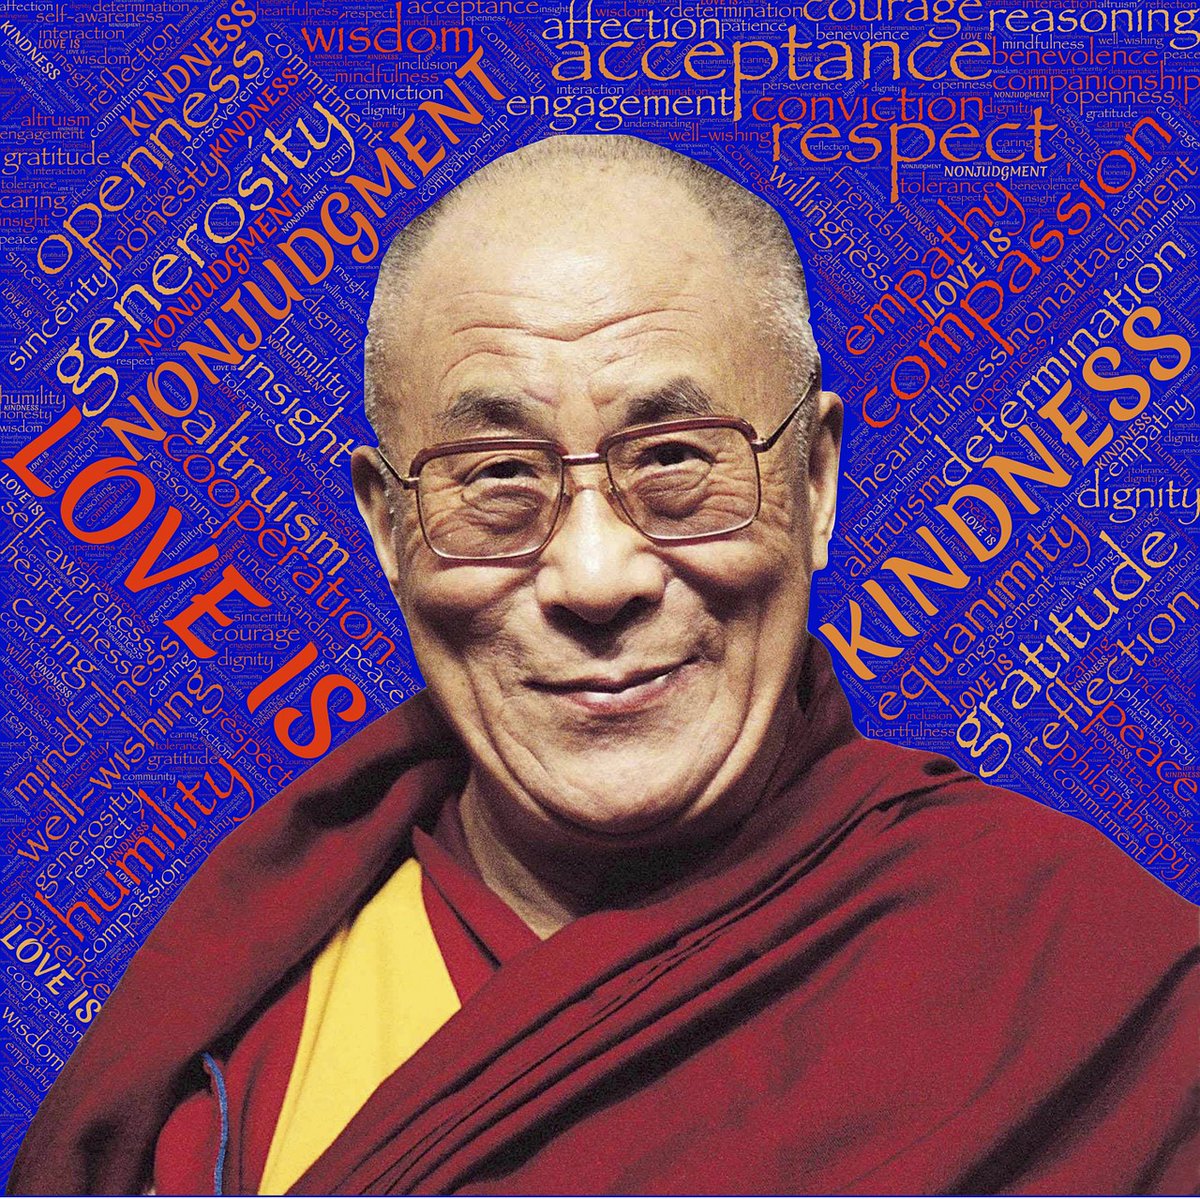 The Dalai Lama has said his religion is kindness. The world needs kindness right now. There is so much anger. We need a tsunami of kindness.  #WritingCommunity #Writers #readingcommunity #readers #KindnessMatters https://t.co/W8ZJS1d38s